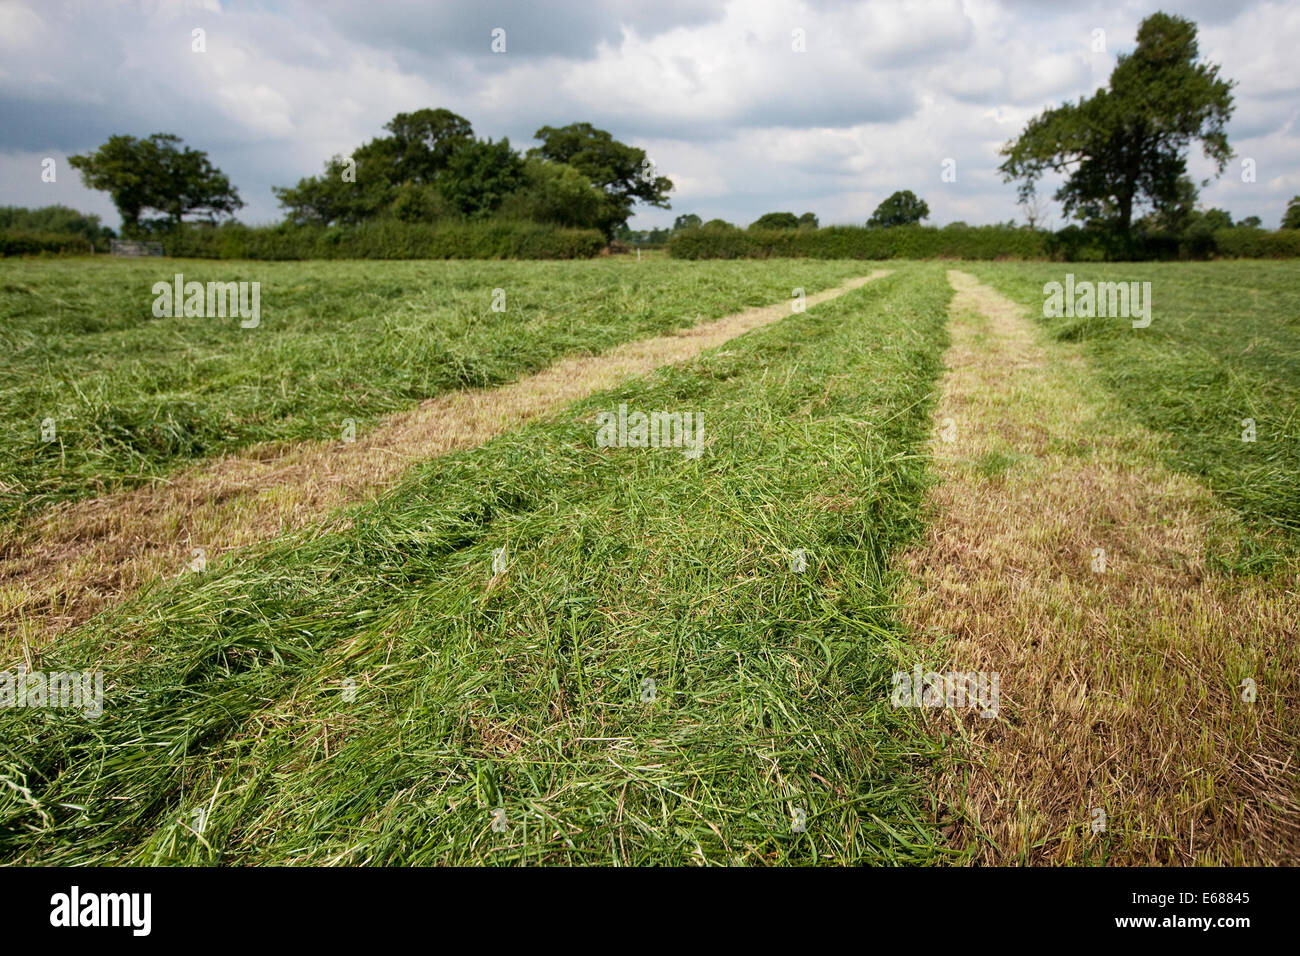 Cut grass in a field ready to make silage Stock Photo